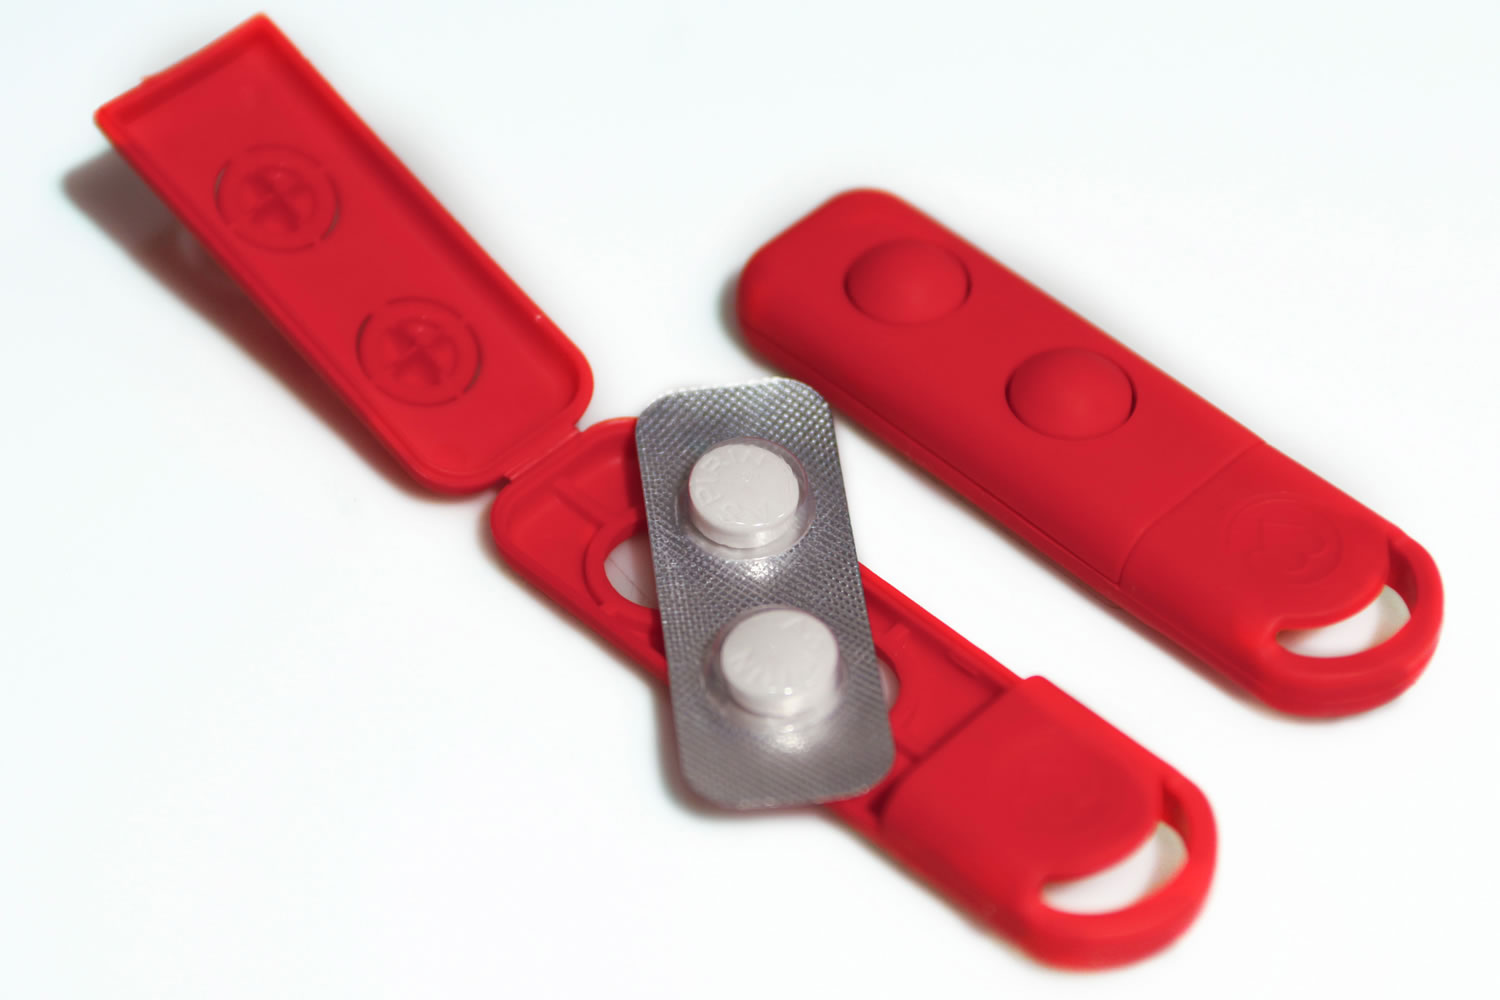 A little red key chain attachment could mean life or death if someone is suffering a heart attack.